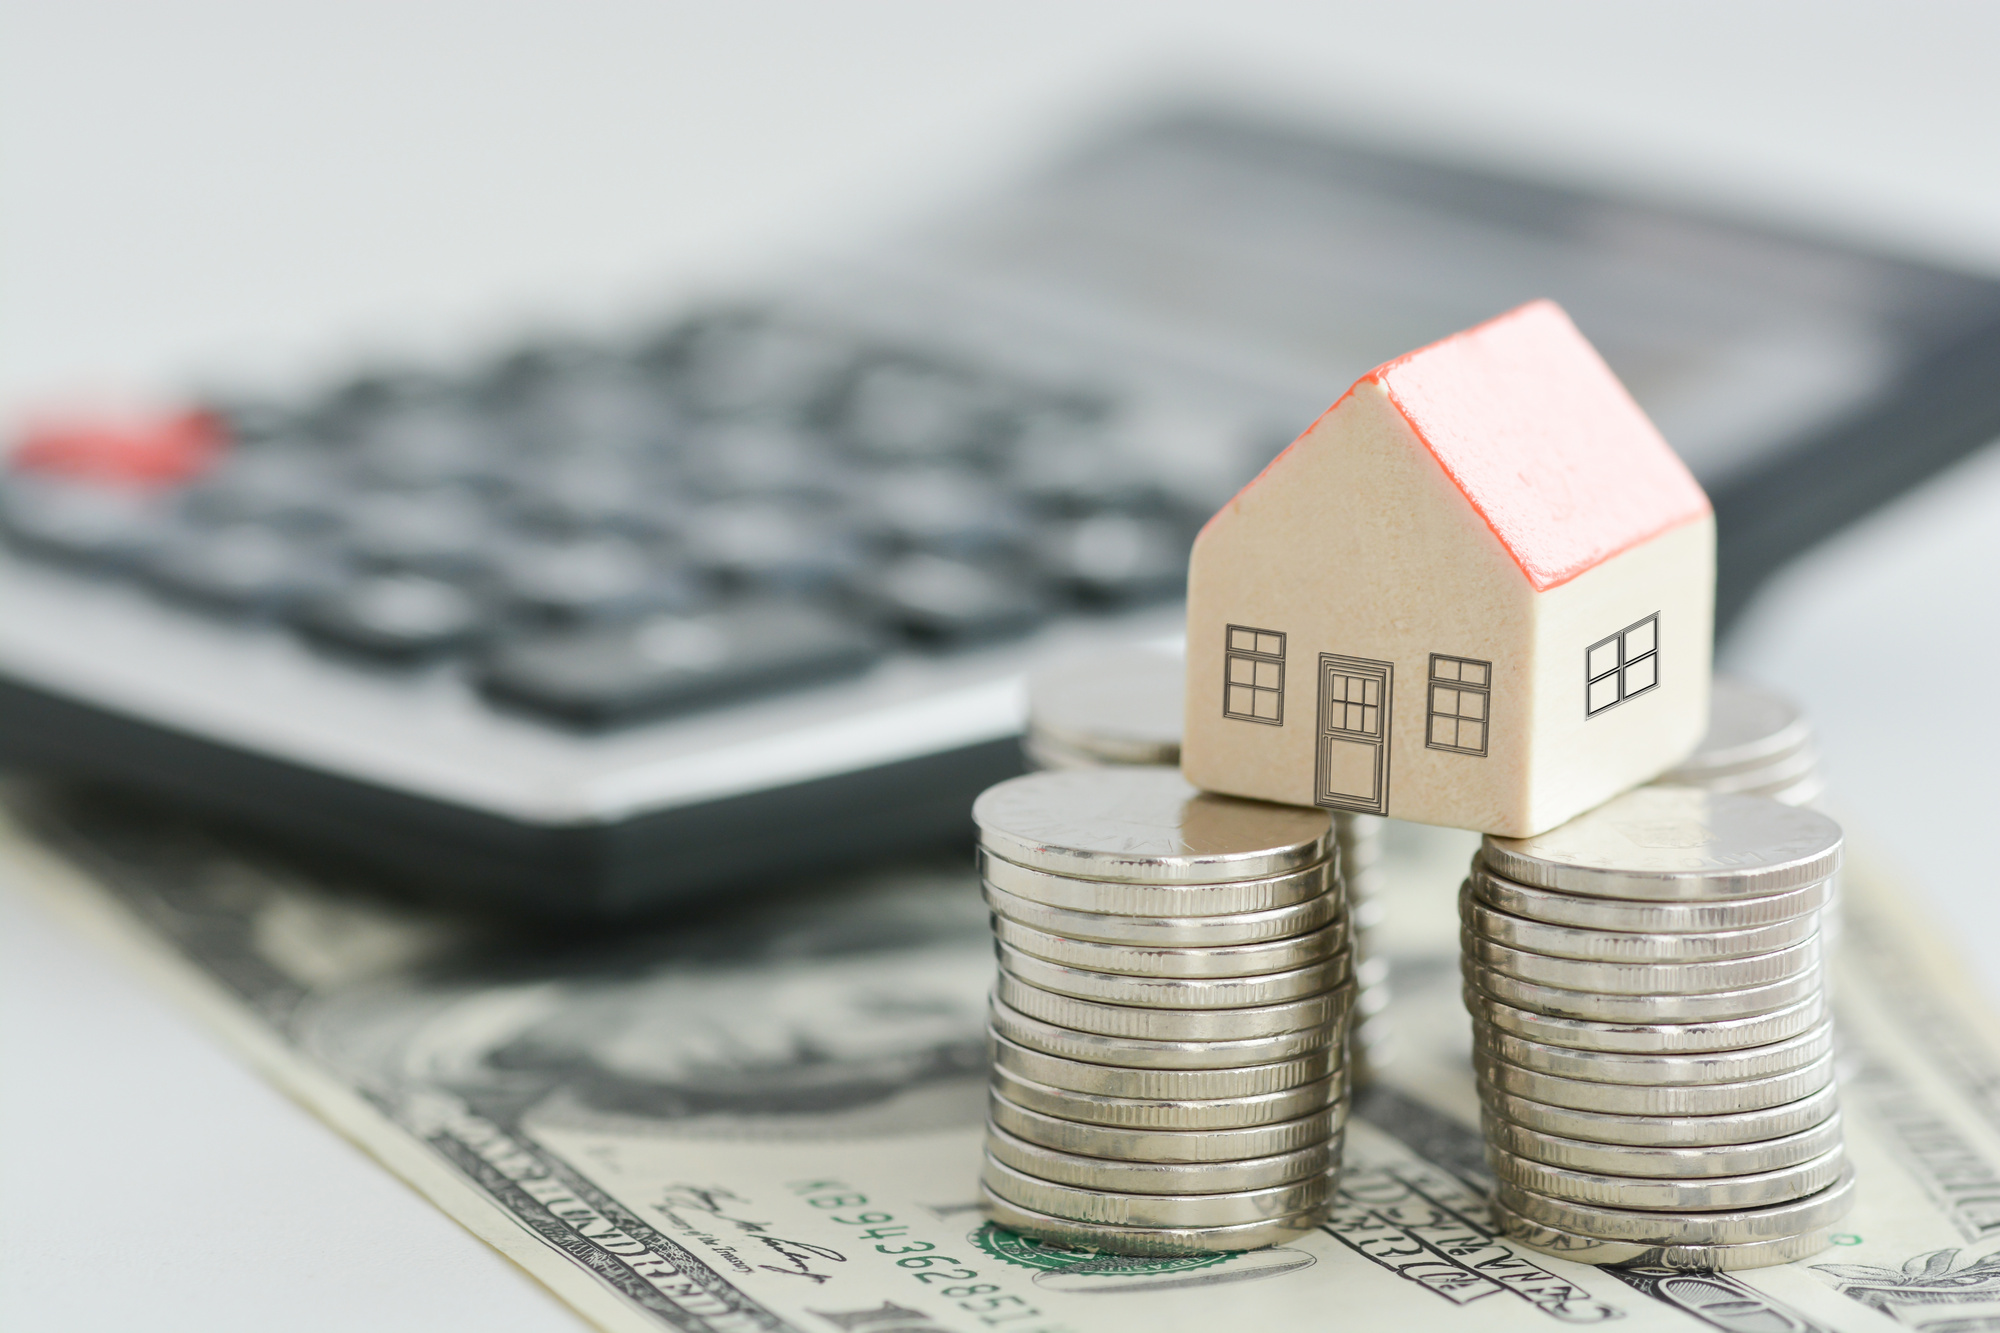 5 Excellent Ways to Become an Even Better Real Estate Investor